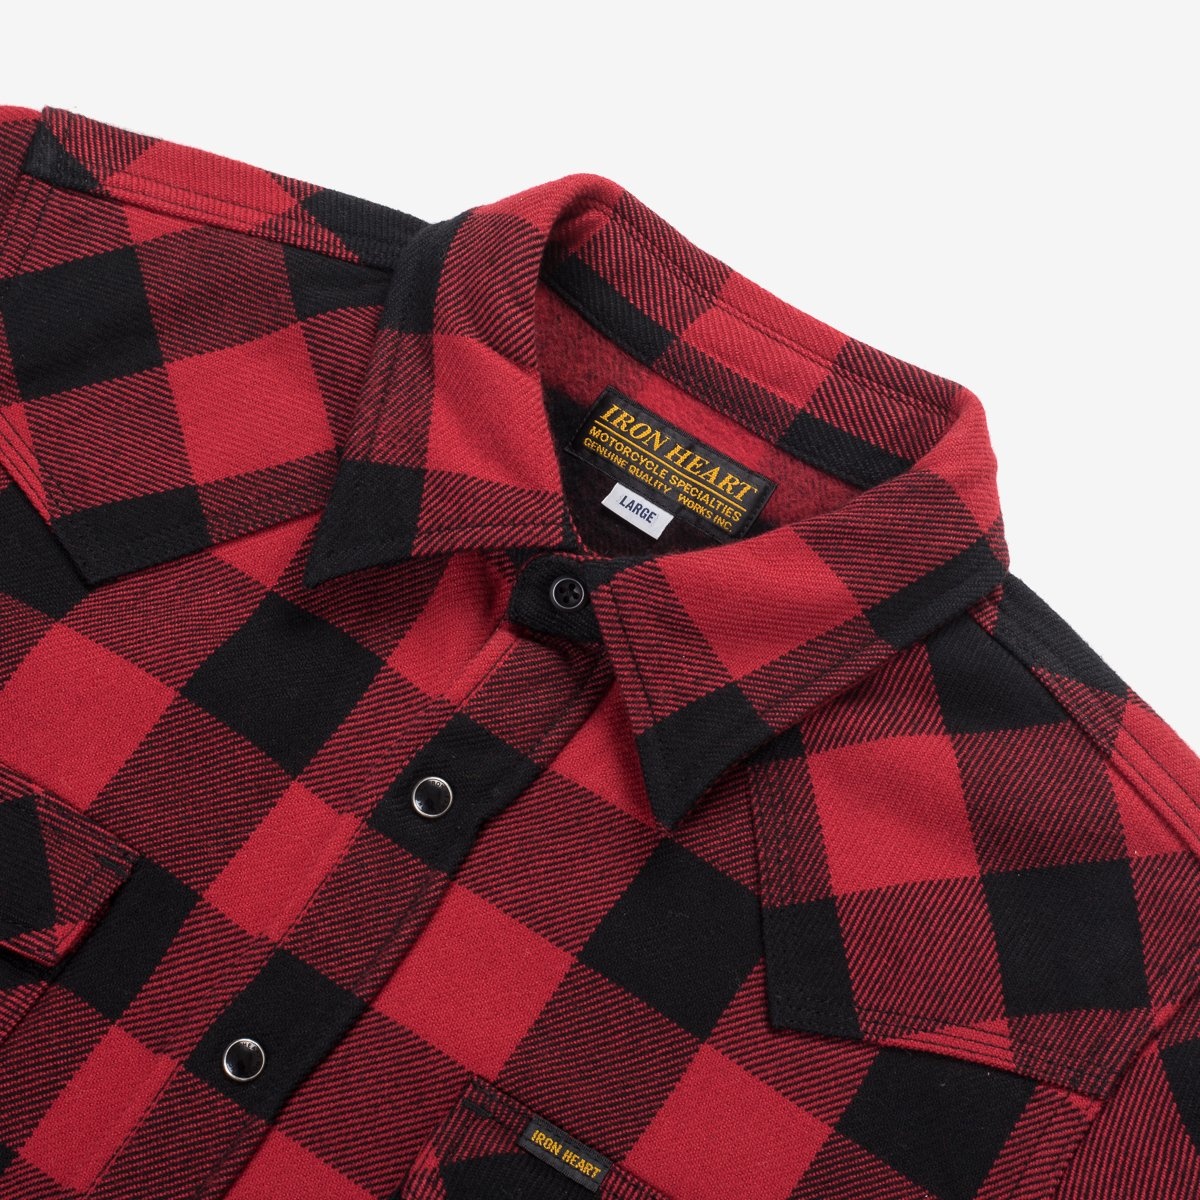 IHSH-232-RED Ultra Heavy Flannel Buffalo Check Western Shirt - Red/Black - 5